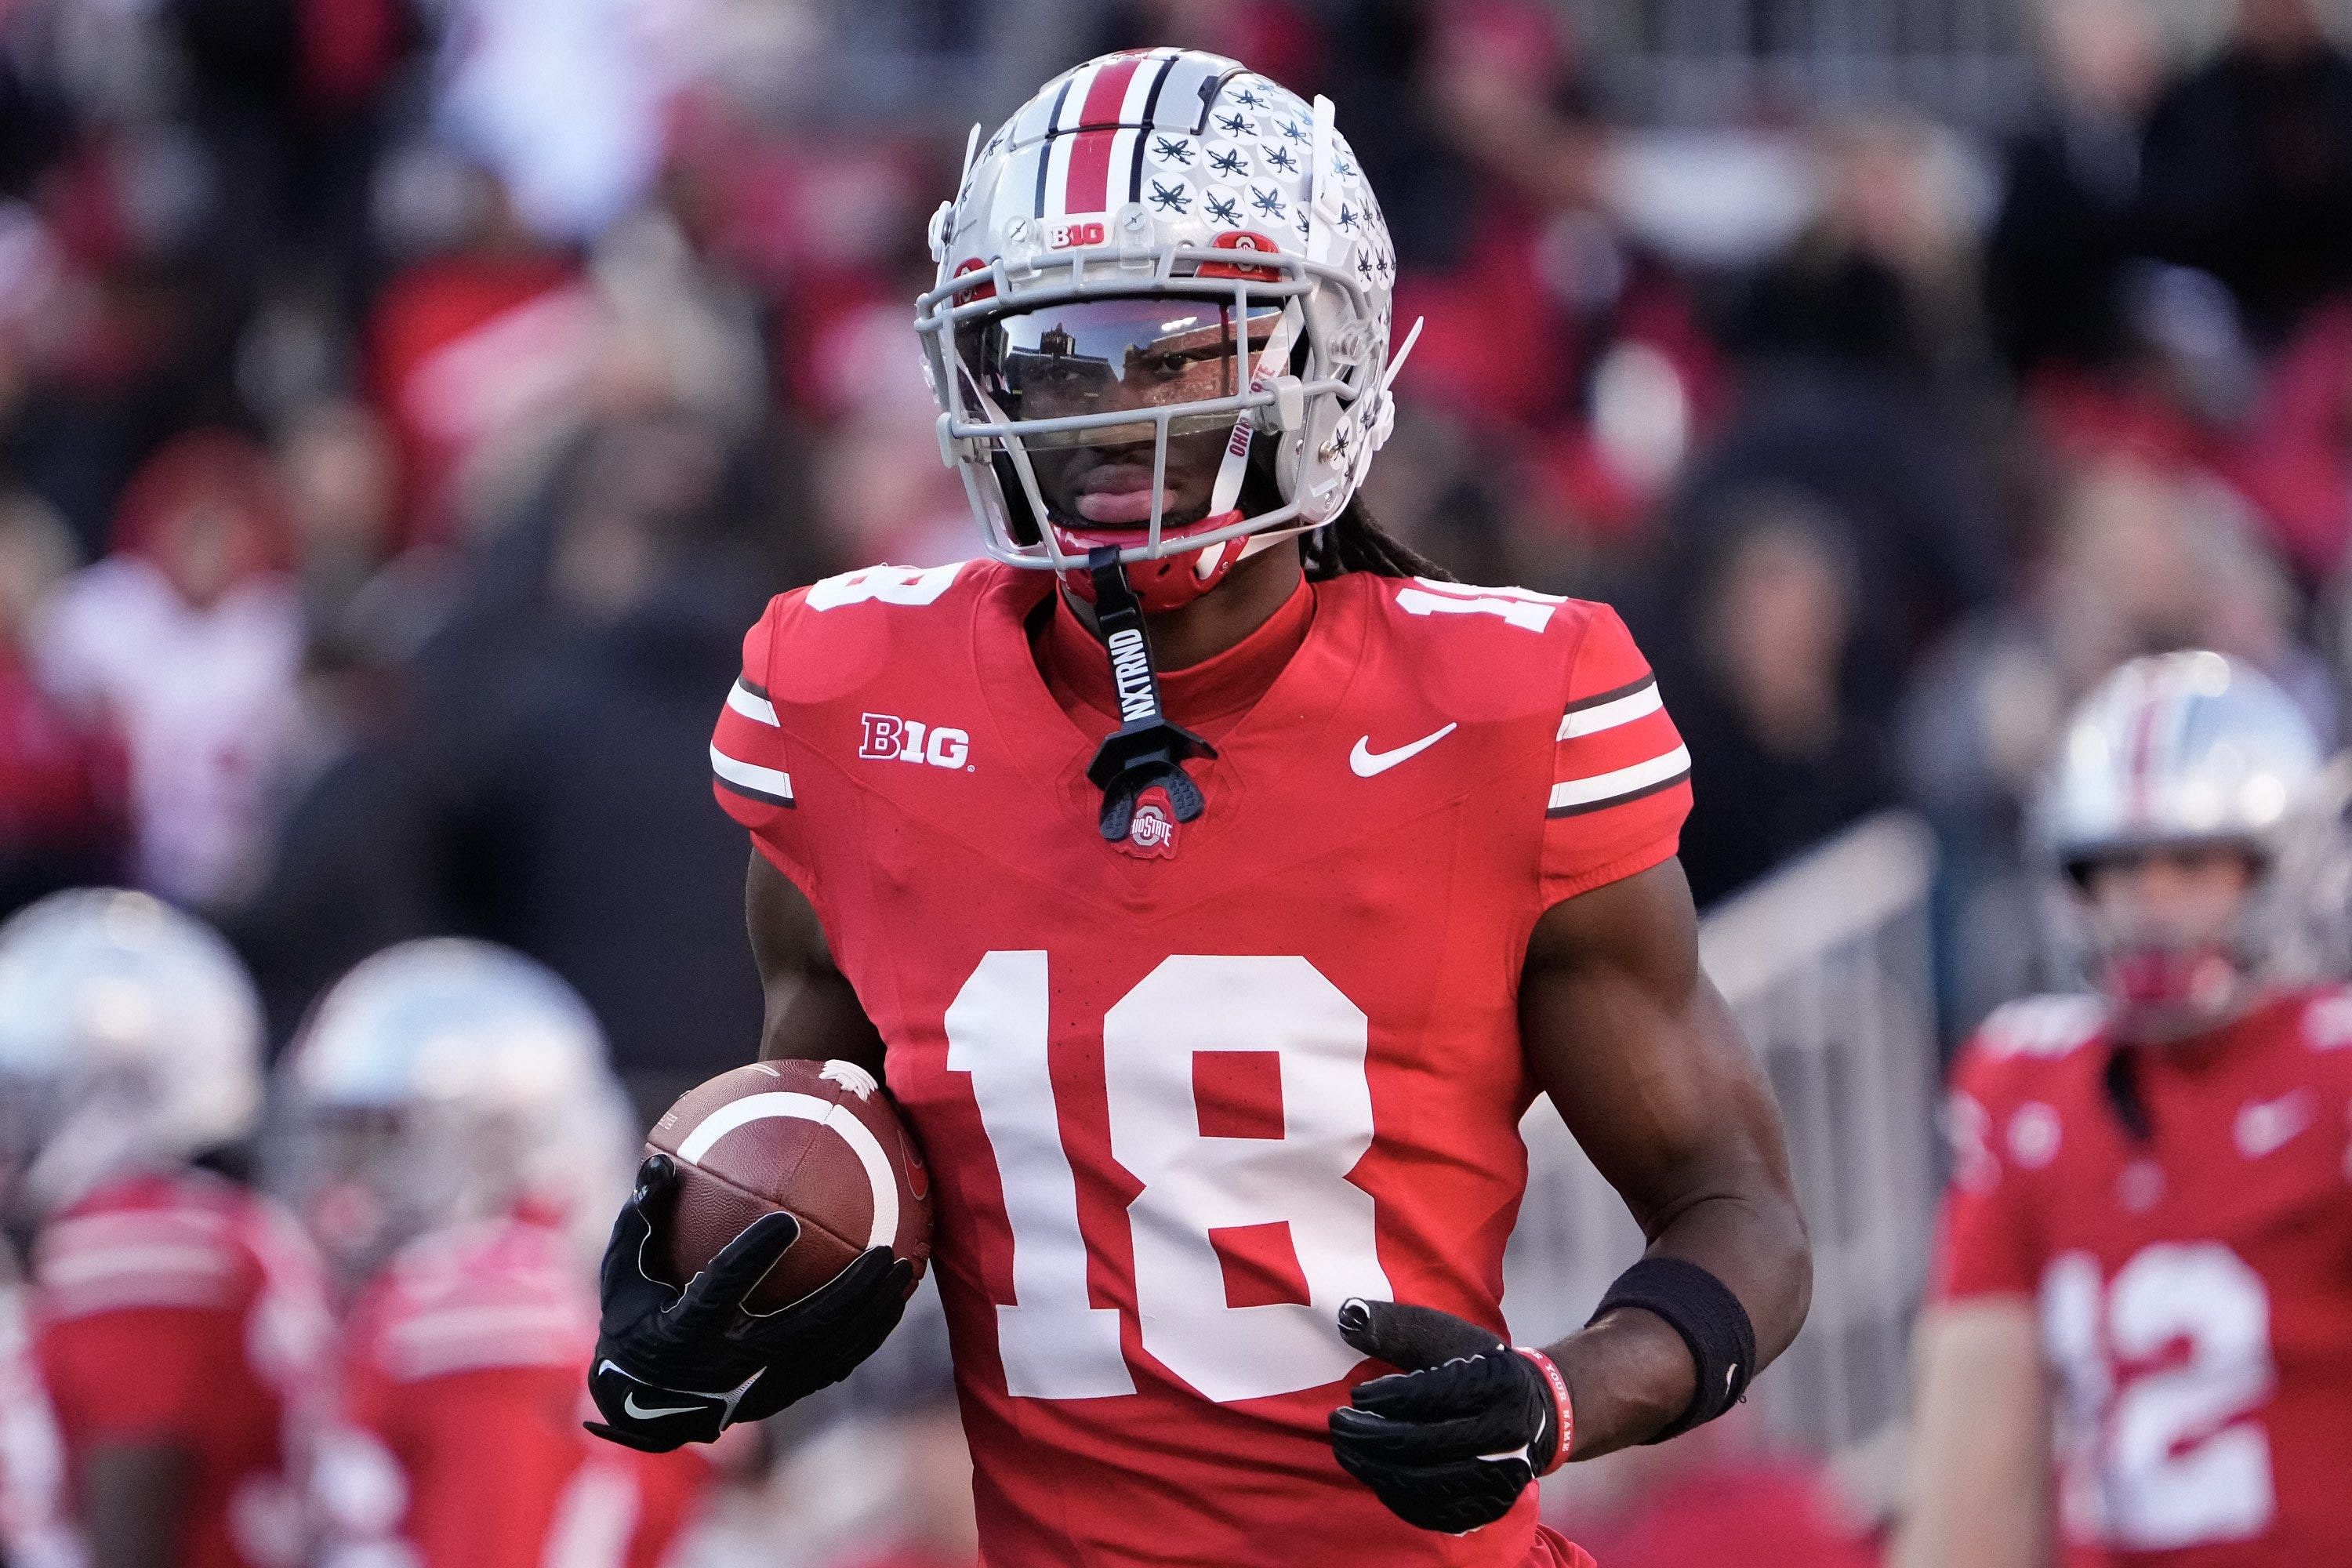 Marvin Harrison Jr. starred at Ohio State